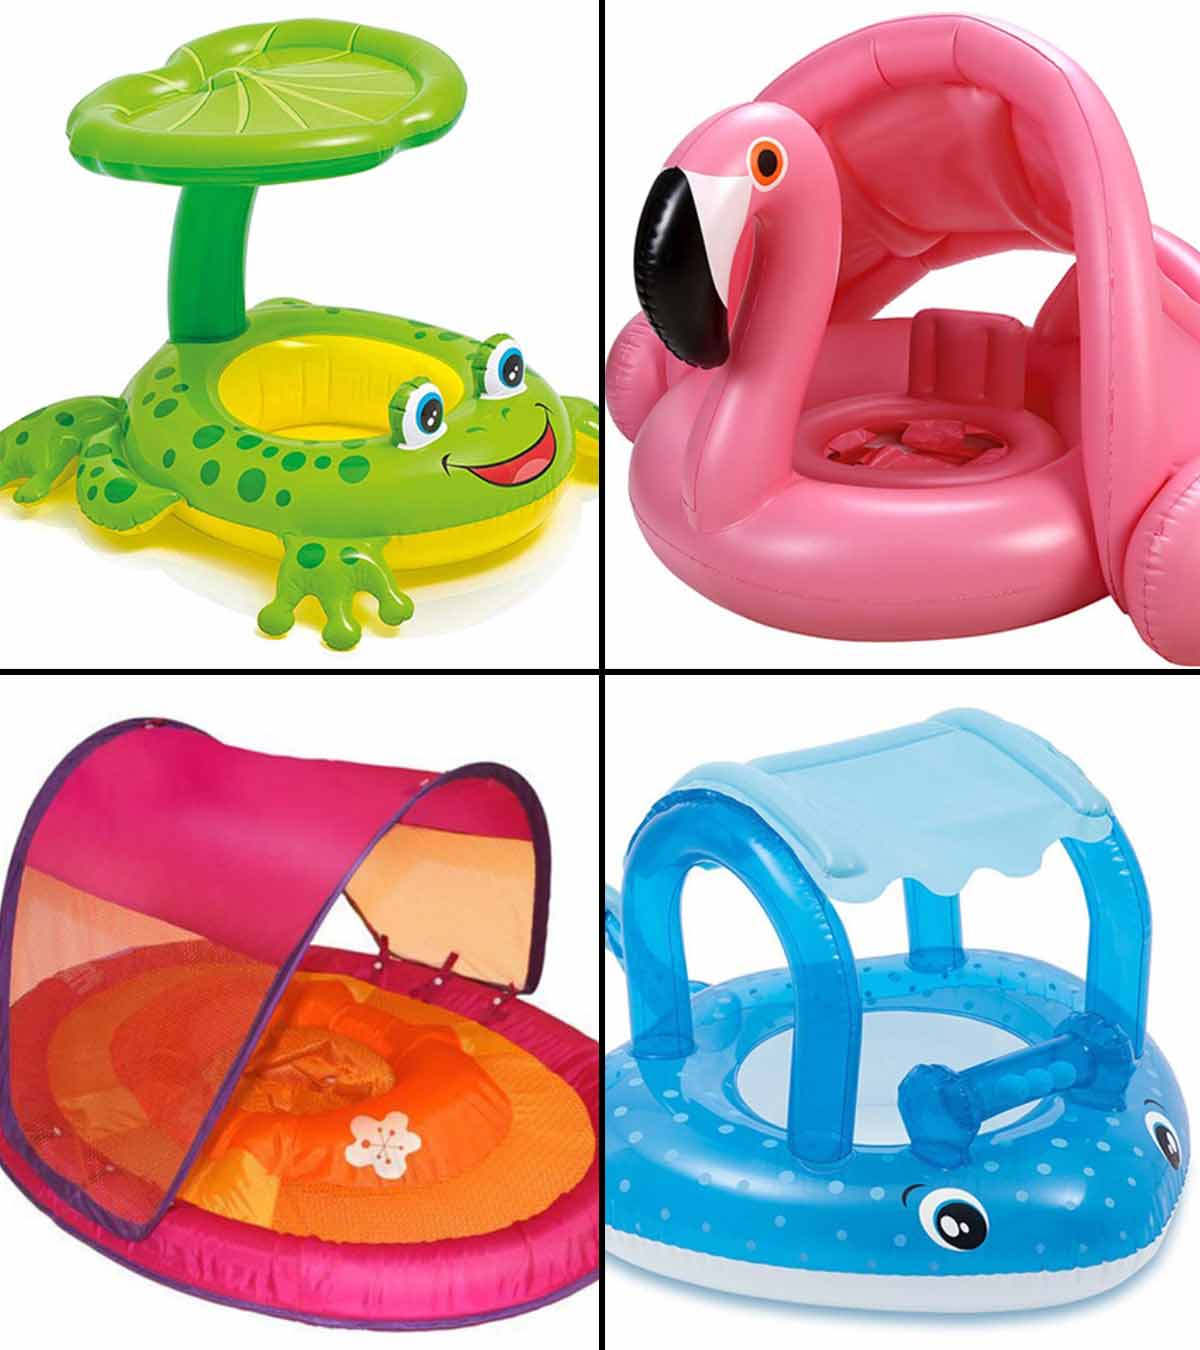 13 Best Baby Floats For Swimming In 2021